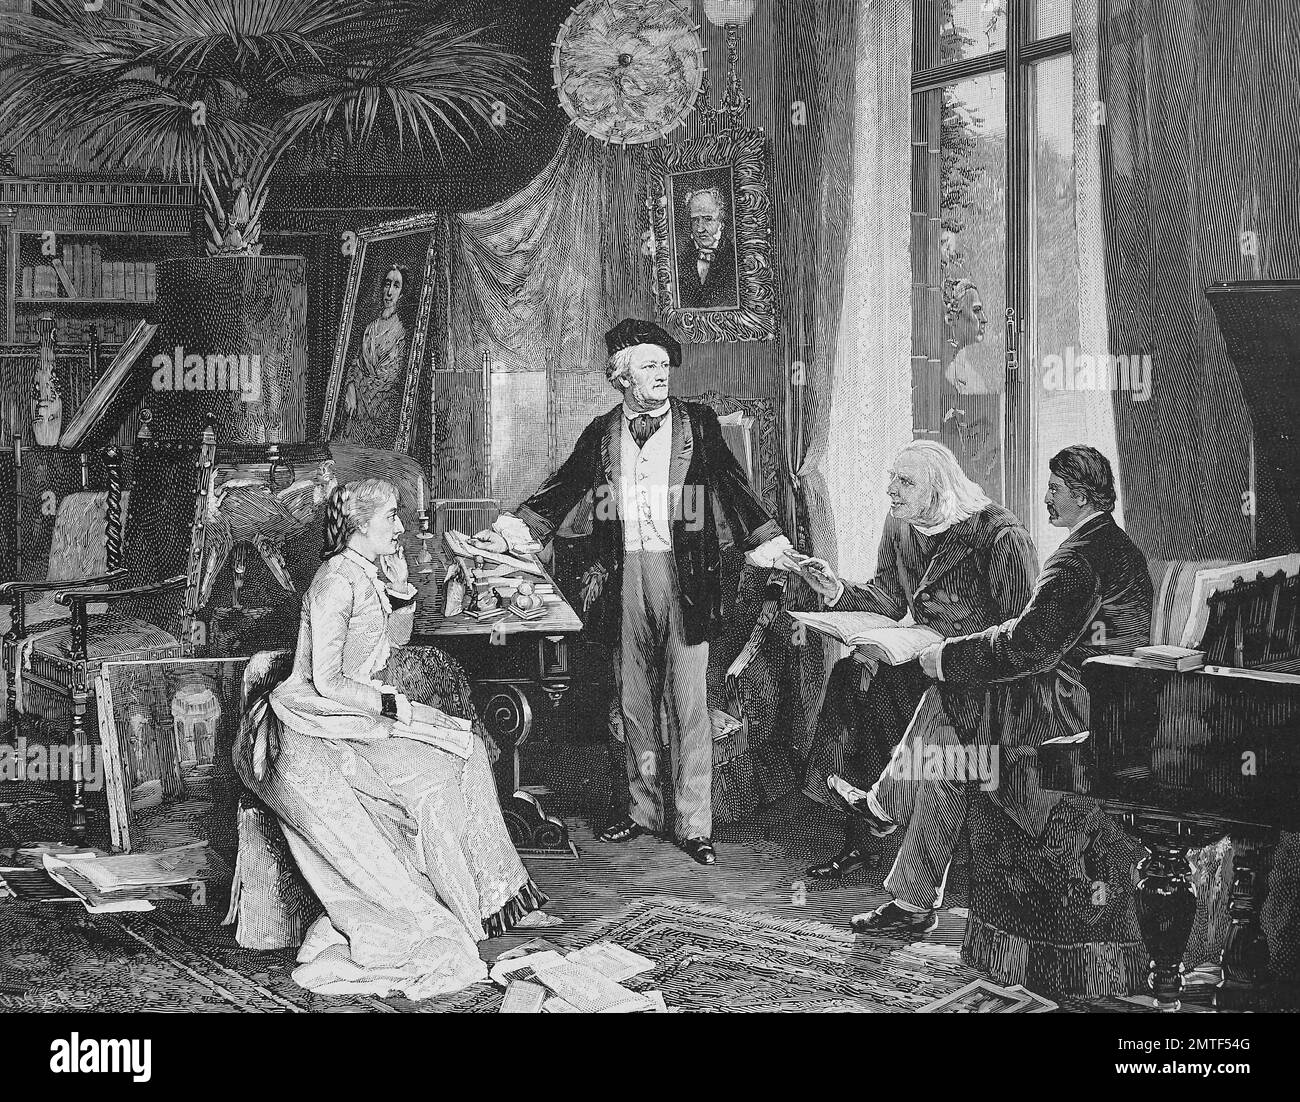 Richard Wagner and Cosima Wagner together with Liszt and Hans von Wolzogen in theit home, the Villa Wahnfried, Bayreuth, Bavaria, Germany Stock Photo